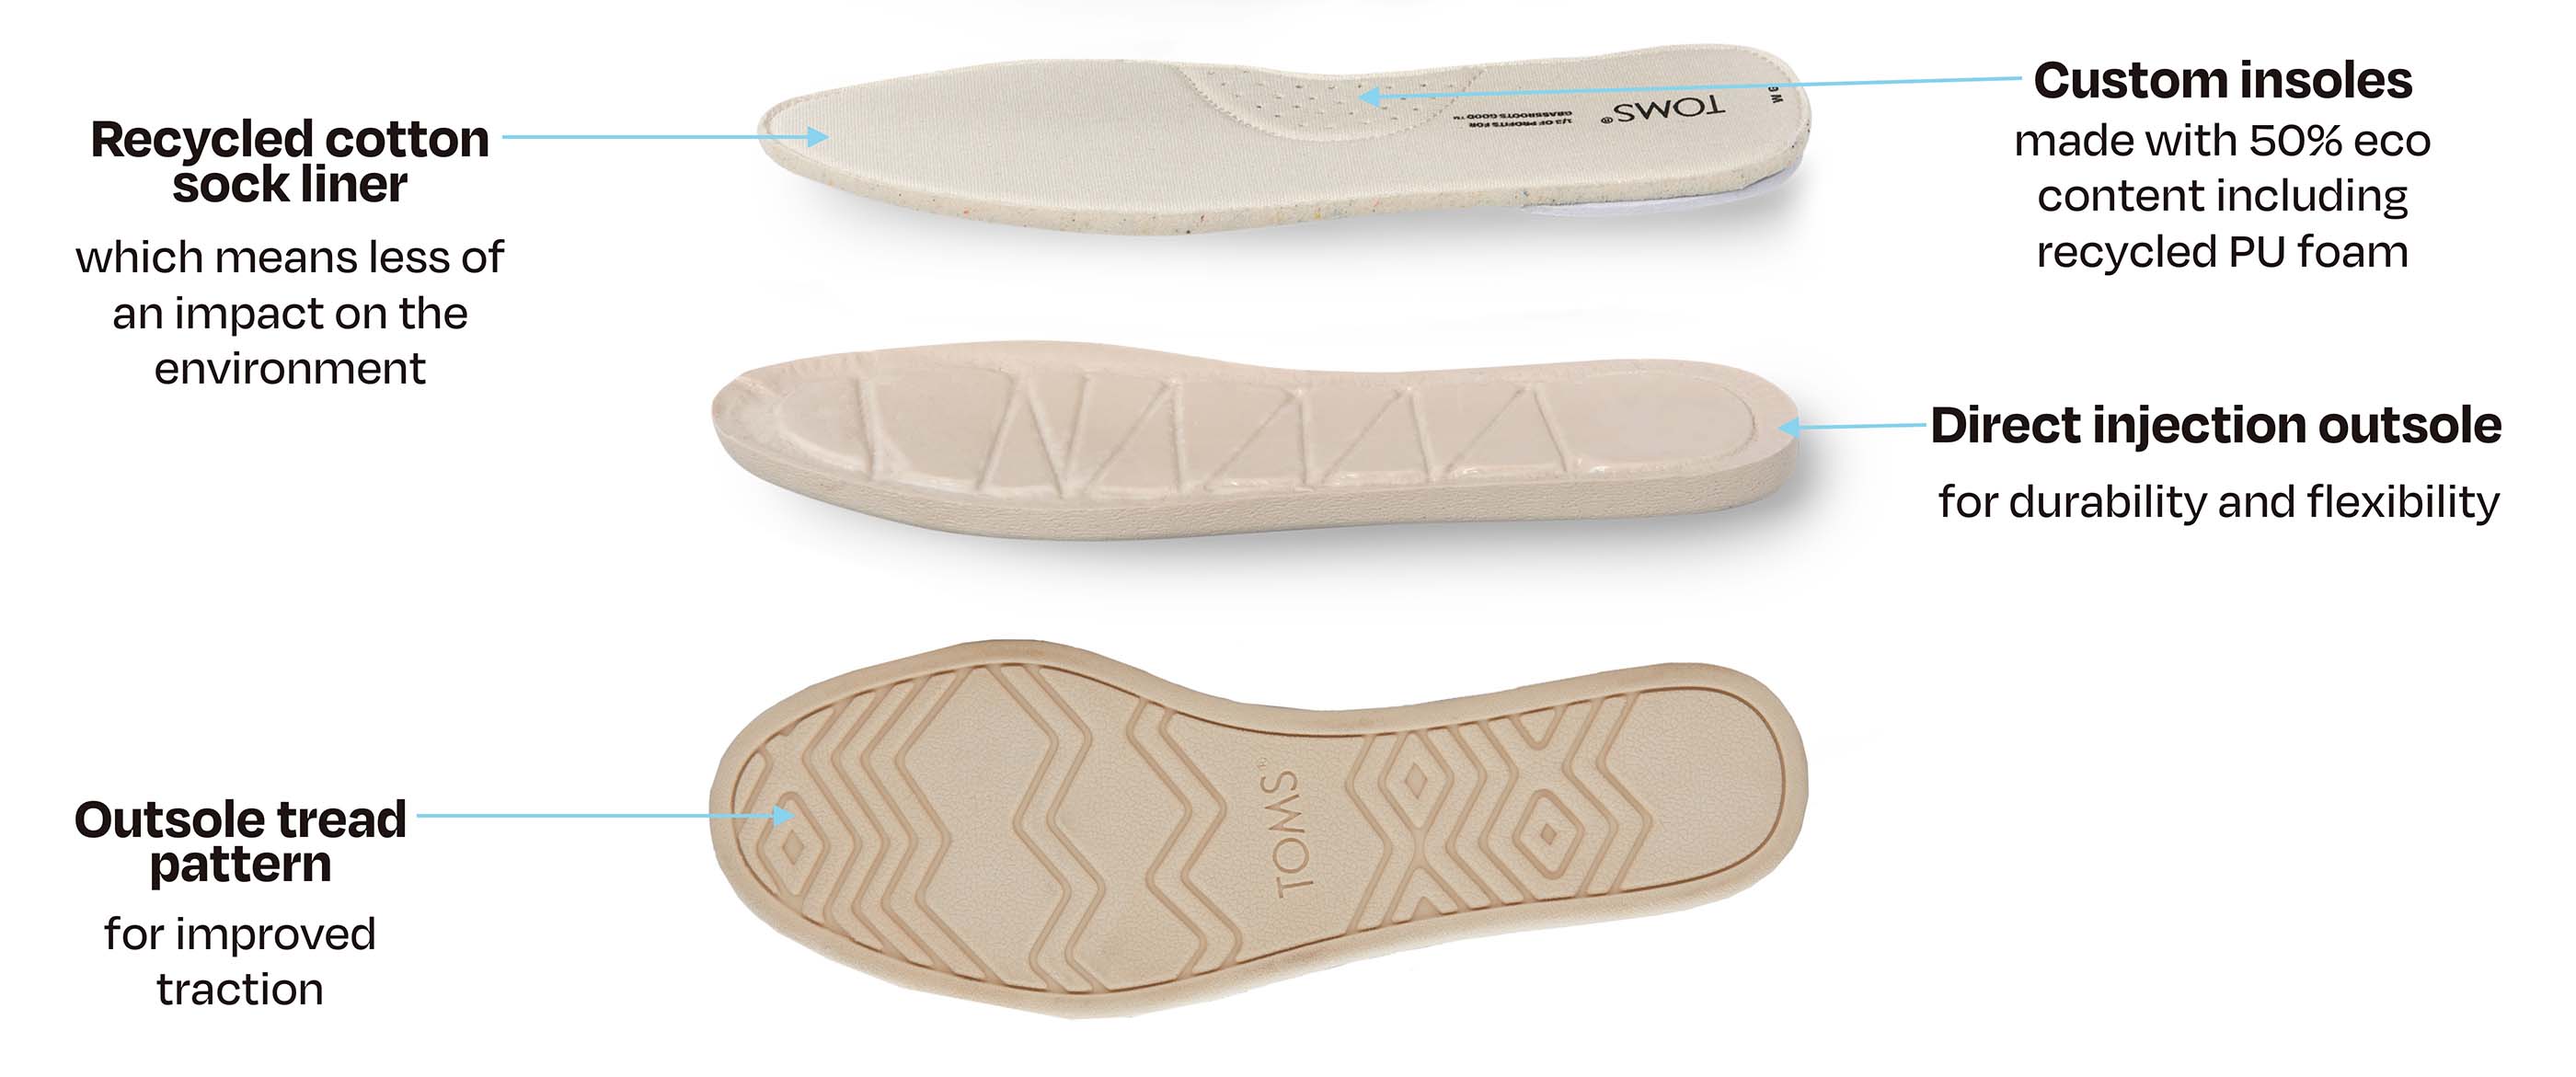 A breakdown of the Alpargarta. Recycled cotton sock liner which means less of an impact on the environment. Custom insoles made with 50% eco content including recycled PU foam. Direct injection outsole for durability and flexibility. Outsole tread pattern for improved traction.